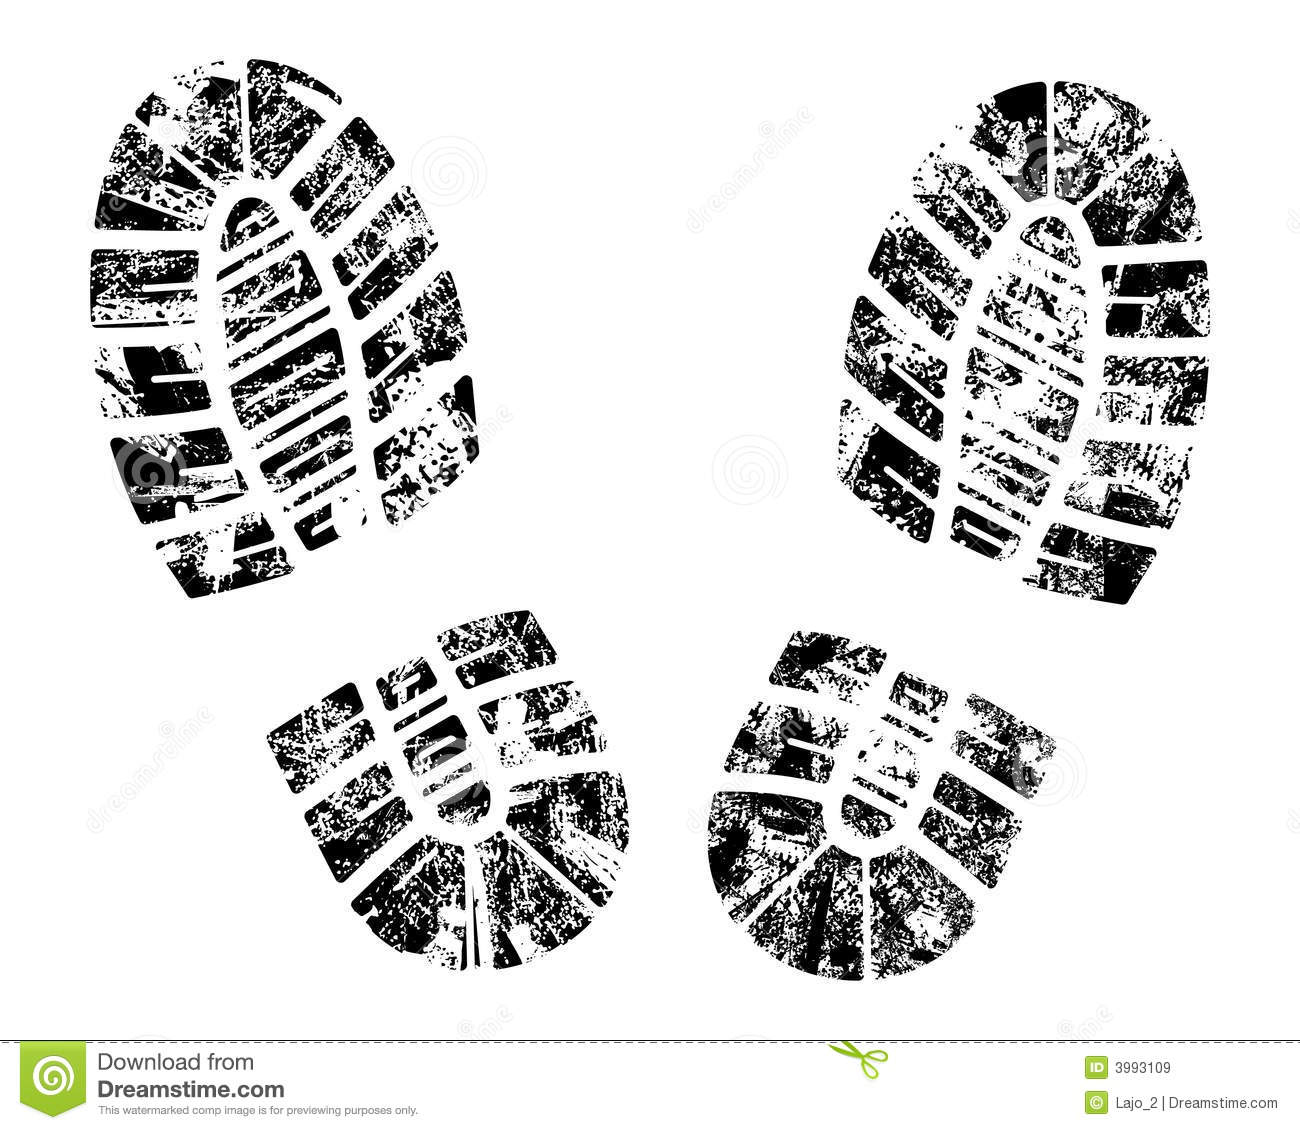 Displaying 20  Images For   Muddy Footprint Clipart   